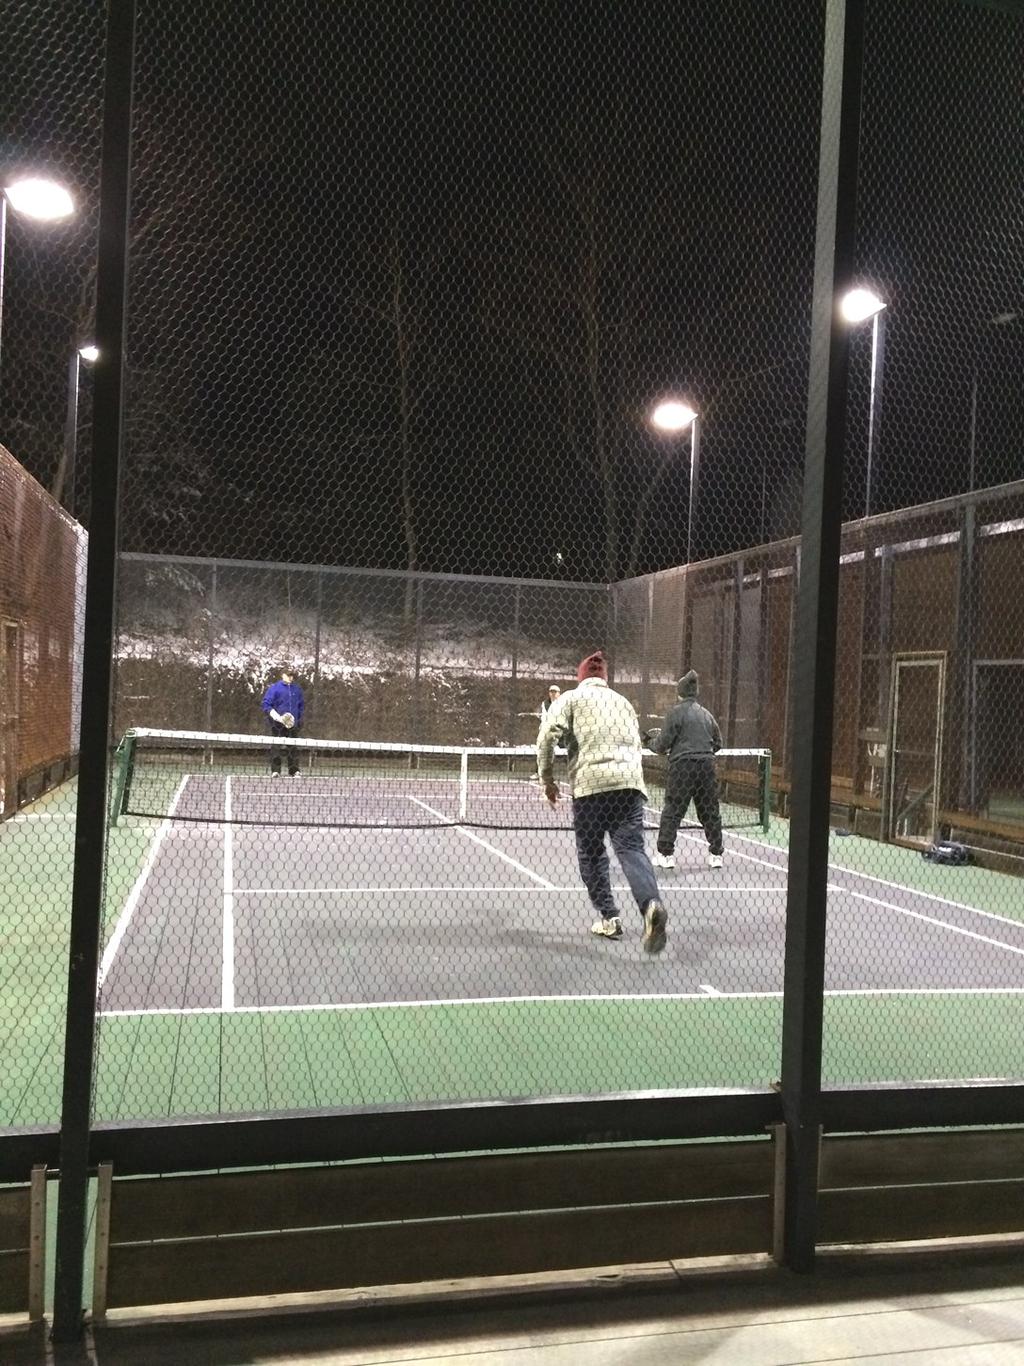 Paddle Tennis Programs 2016-2017 Season Paddle Tennis Program Platform Tennis usually referred to as Paddle Tennis is an American racquet sport which is played outdoors during the fall, winter, and